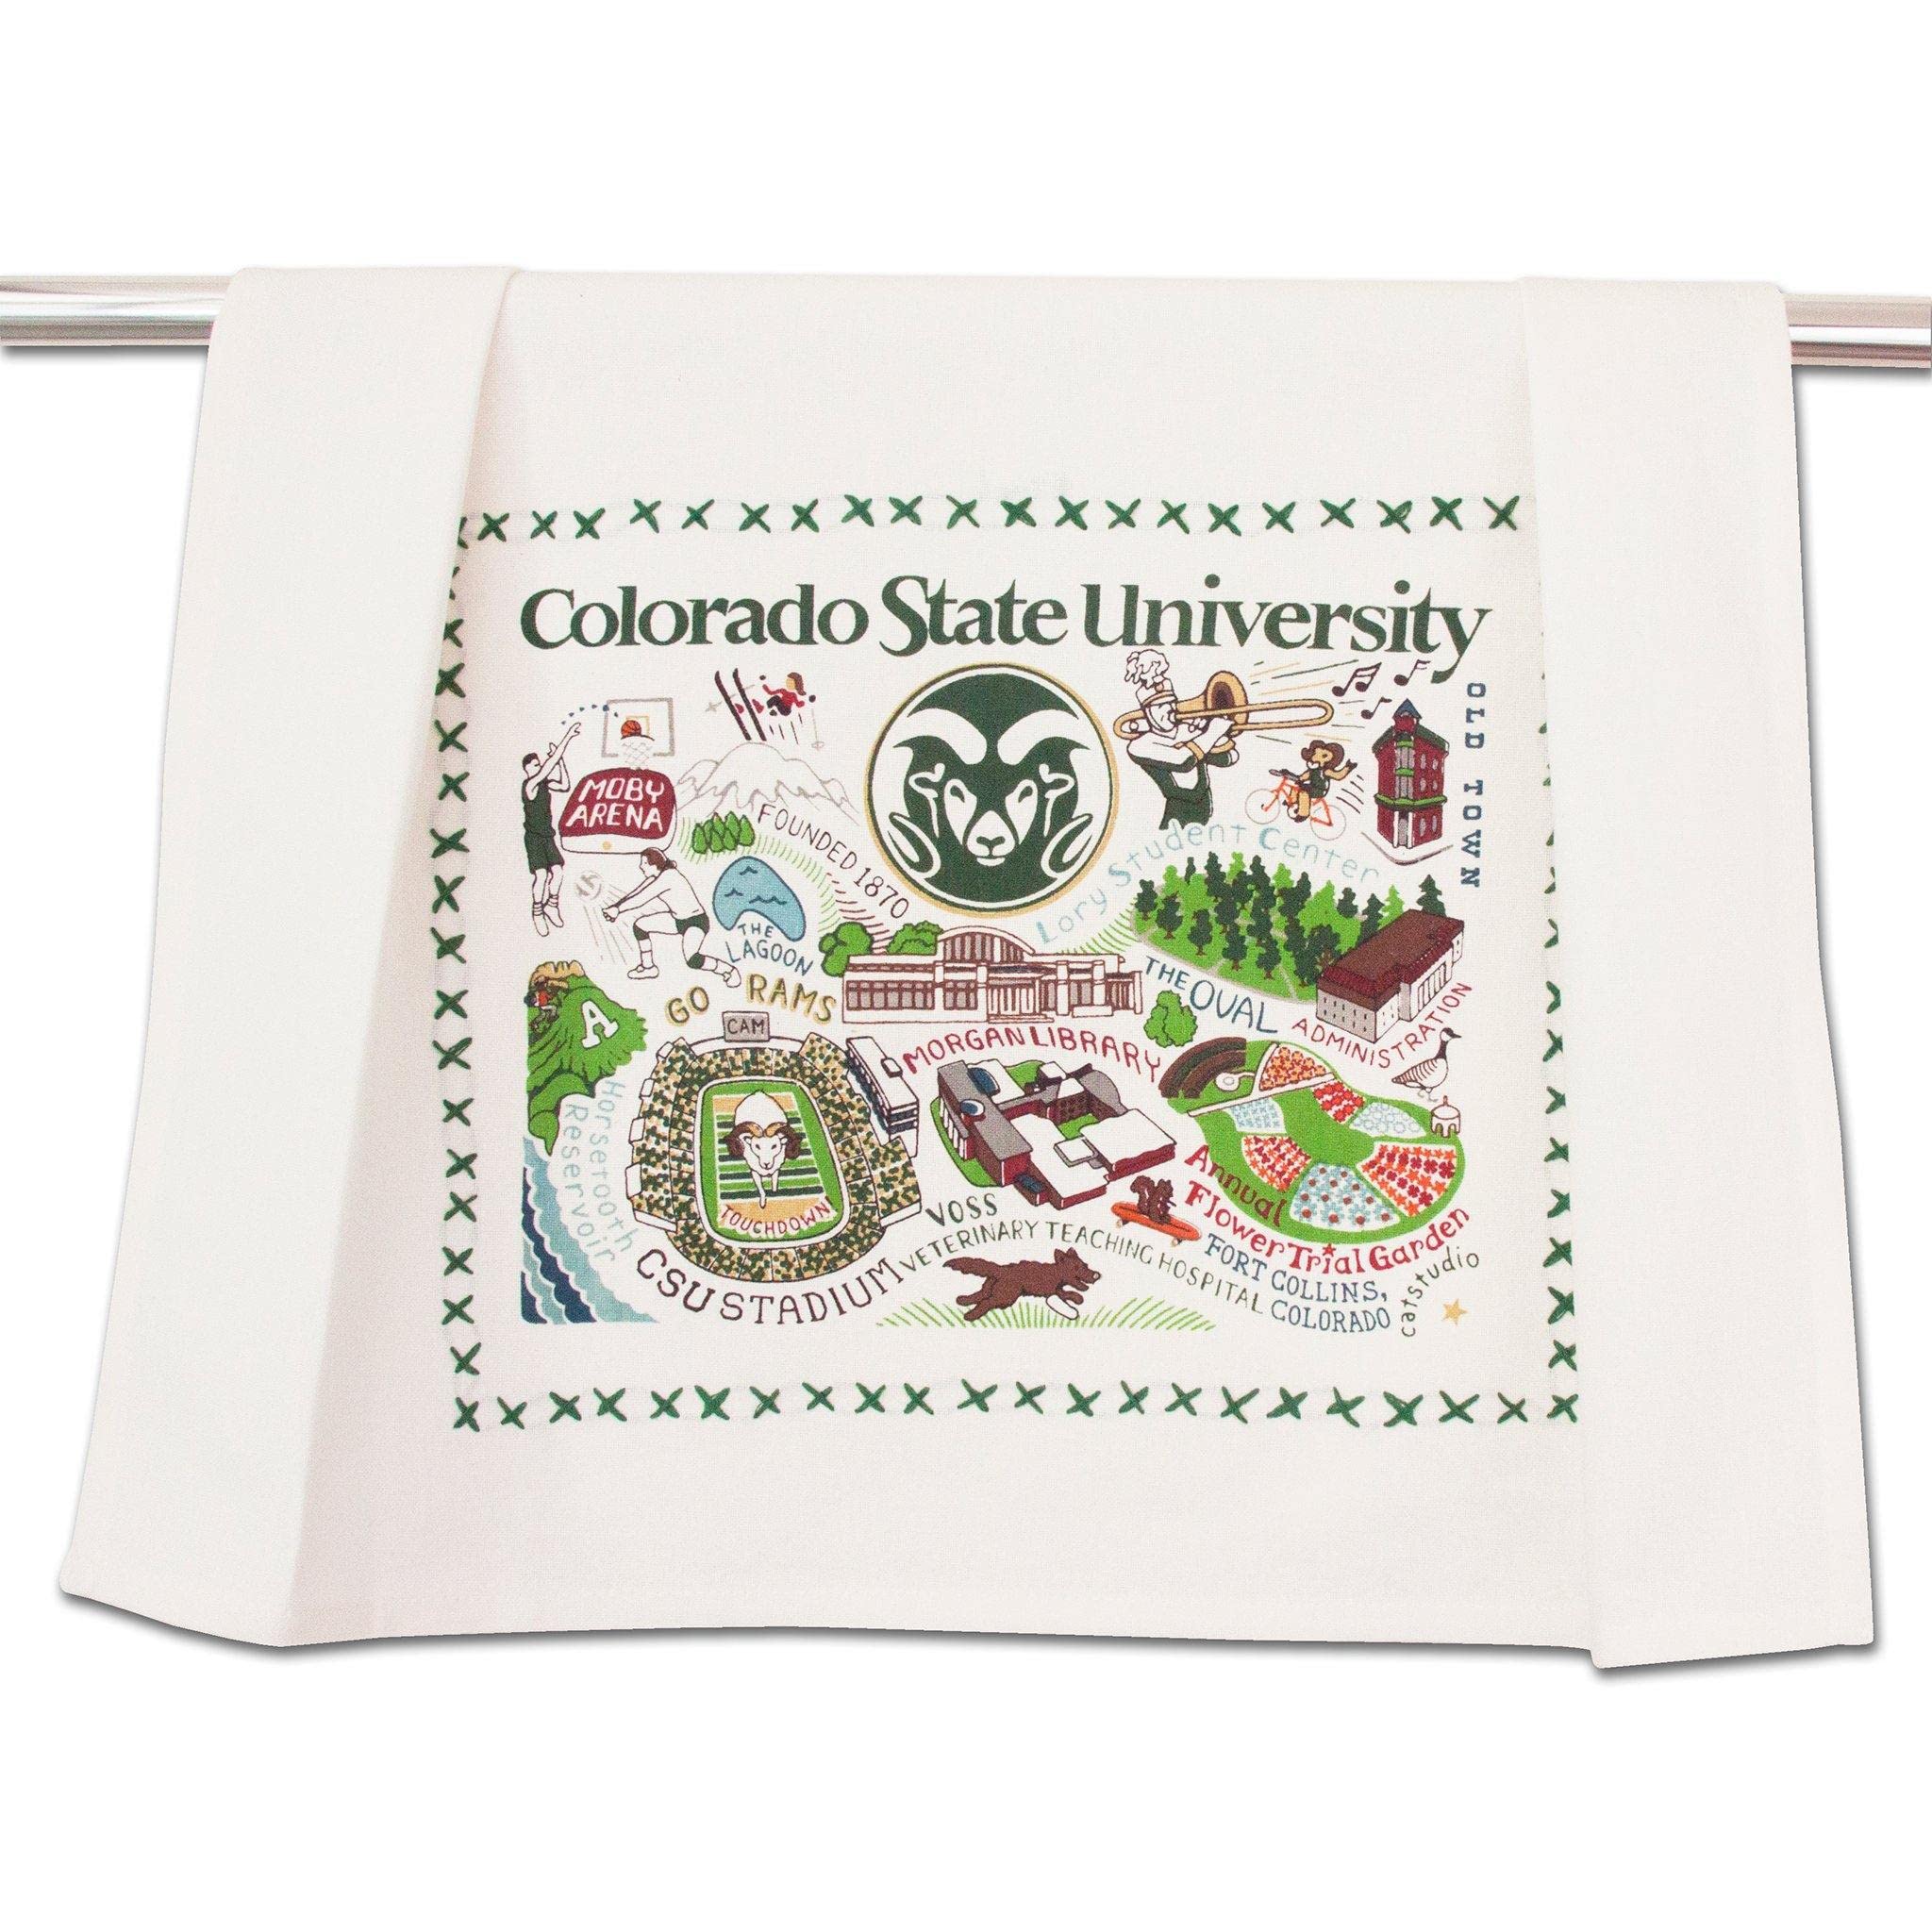 Catstudio Dish Towel, Colorado State University Rams Hand Towel - Collegiate Kitchen Towel for Colorado State Fans for Students, Graduation, Parents and Alums